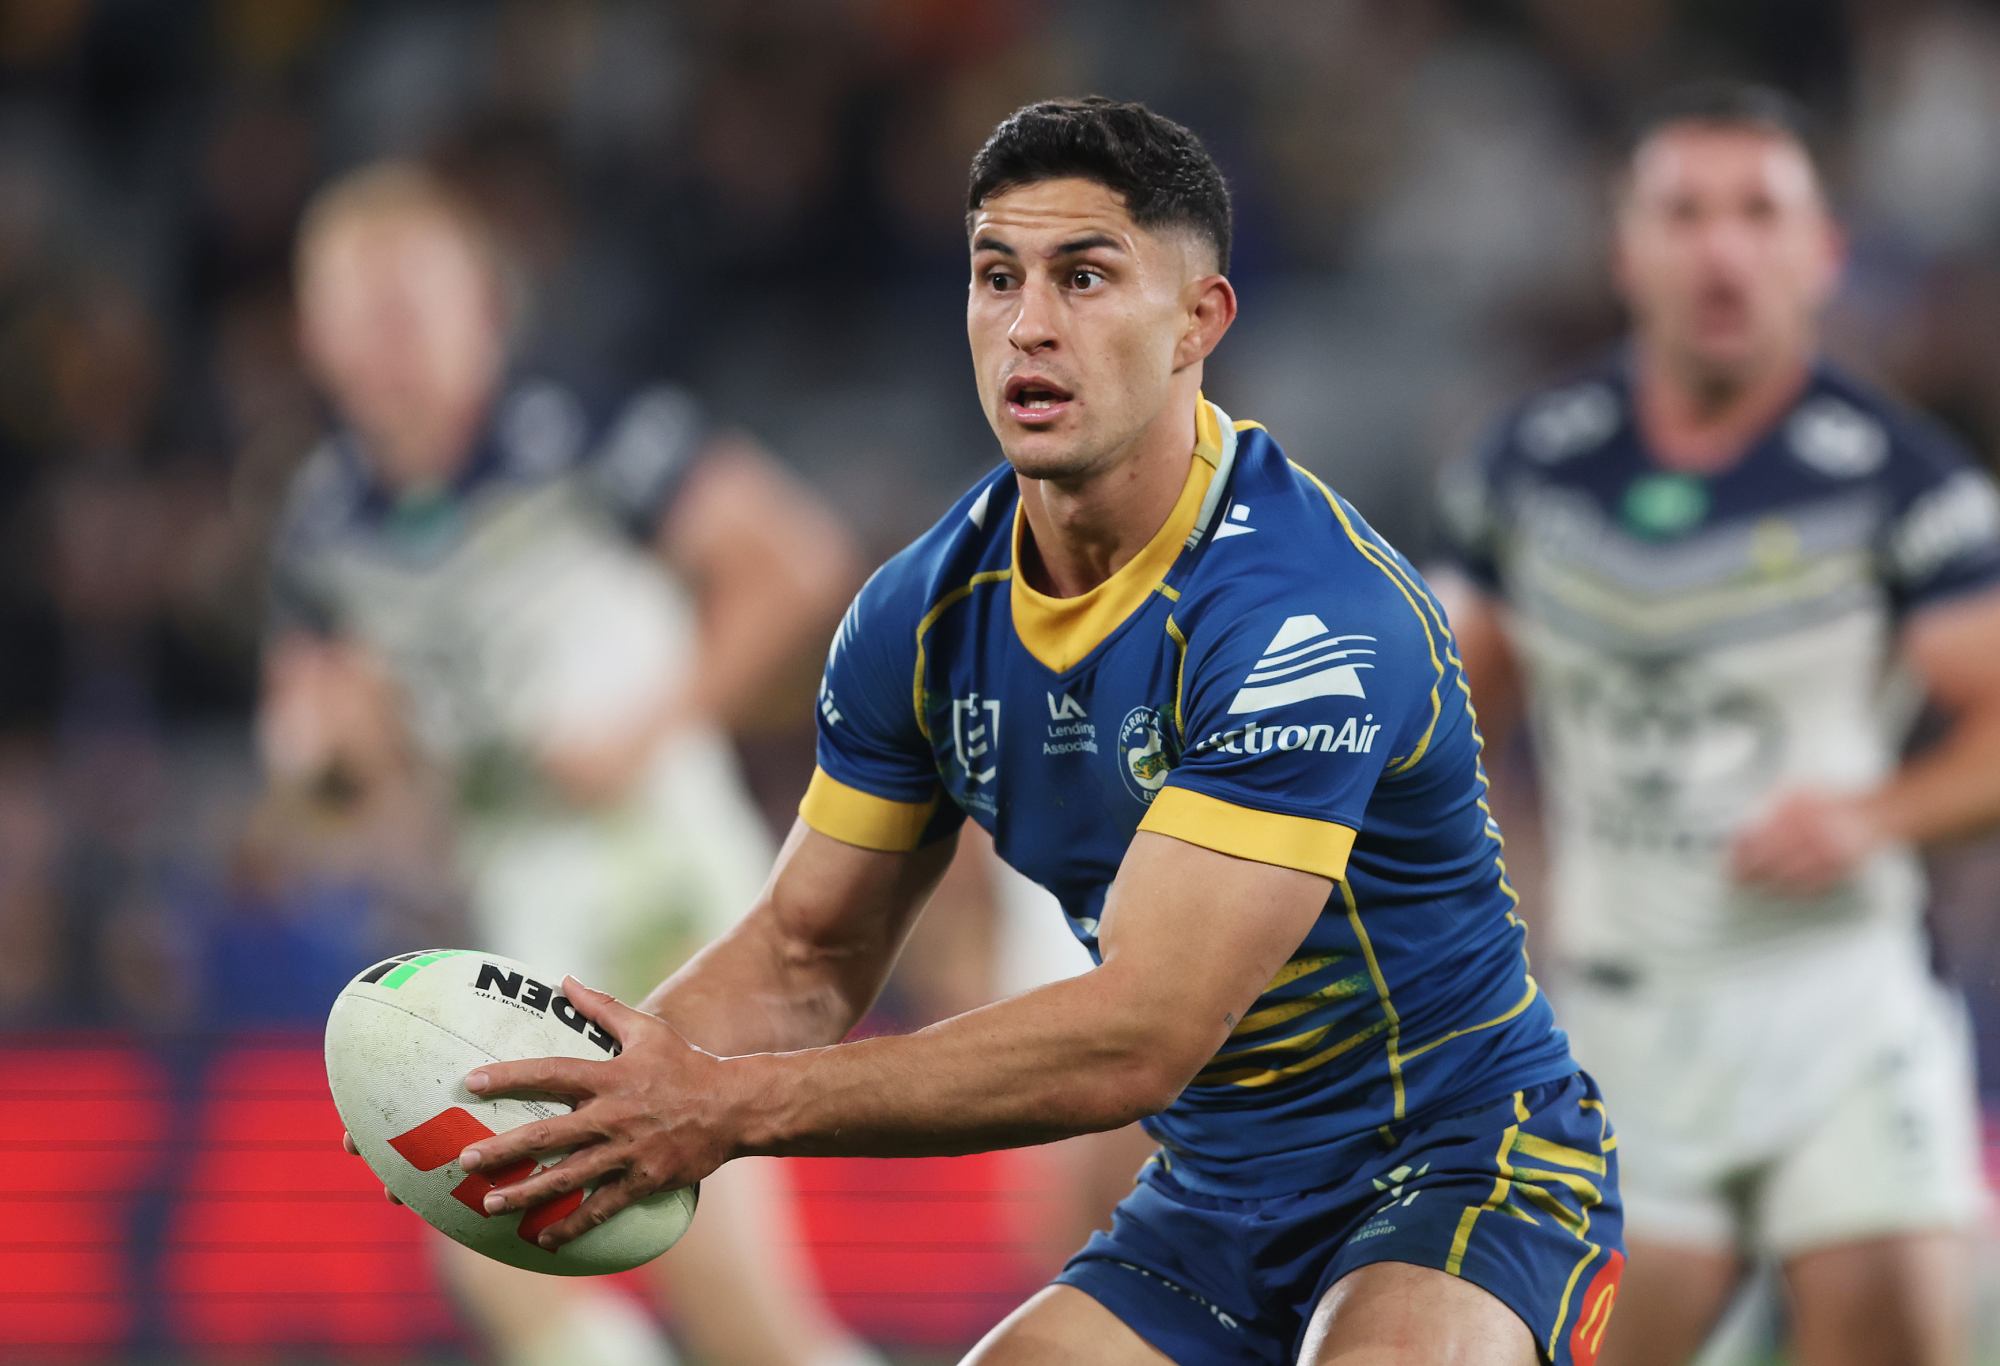 SYDNEY, AUSTRALIA - MAY 26: Dylan Brown of the Eels runs with the ball during the round 13 NRL match between Parramatta Eels and North Queensland Cowboys at CommBank Stadium on May 26, 2023 in Sydney, Australia. (Photo by Mark Metcalfe/Getty Images)